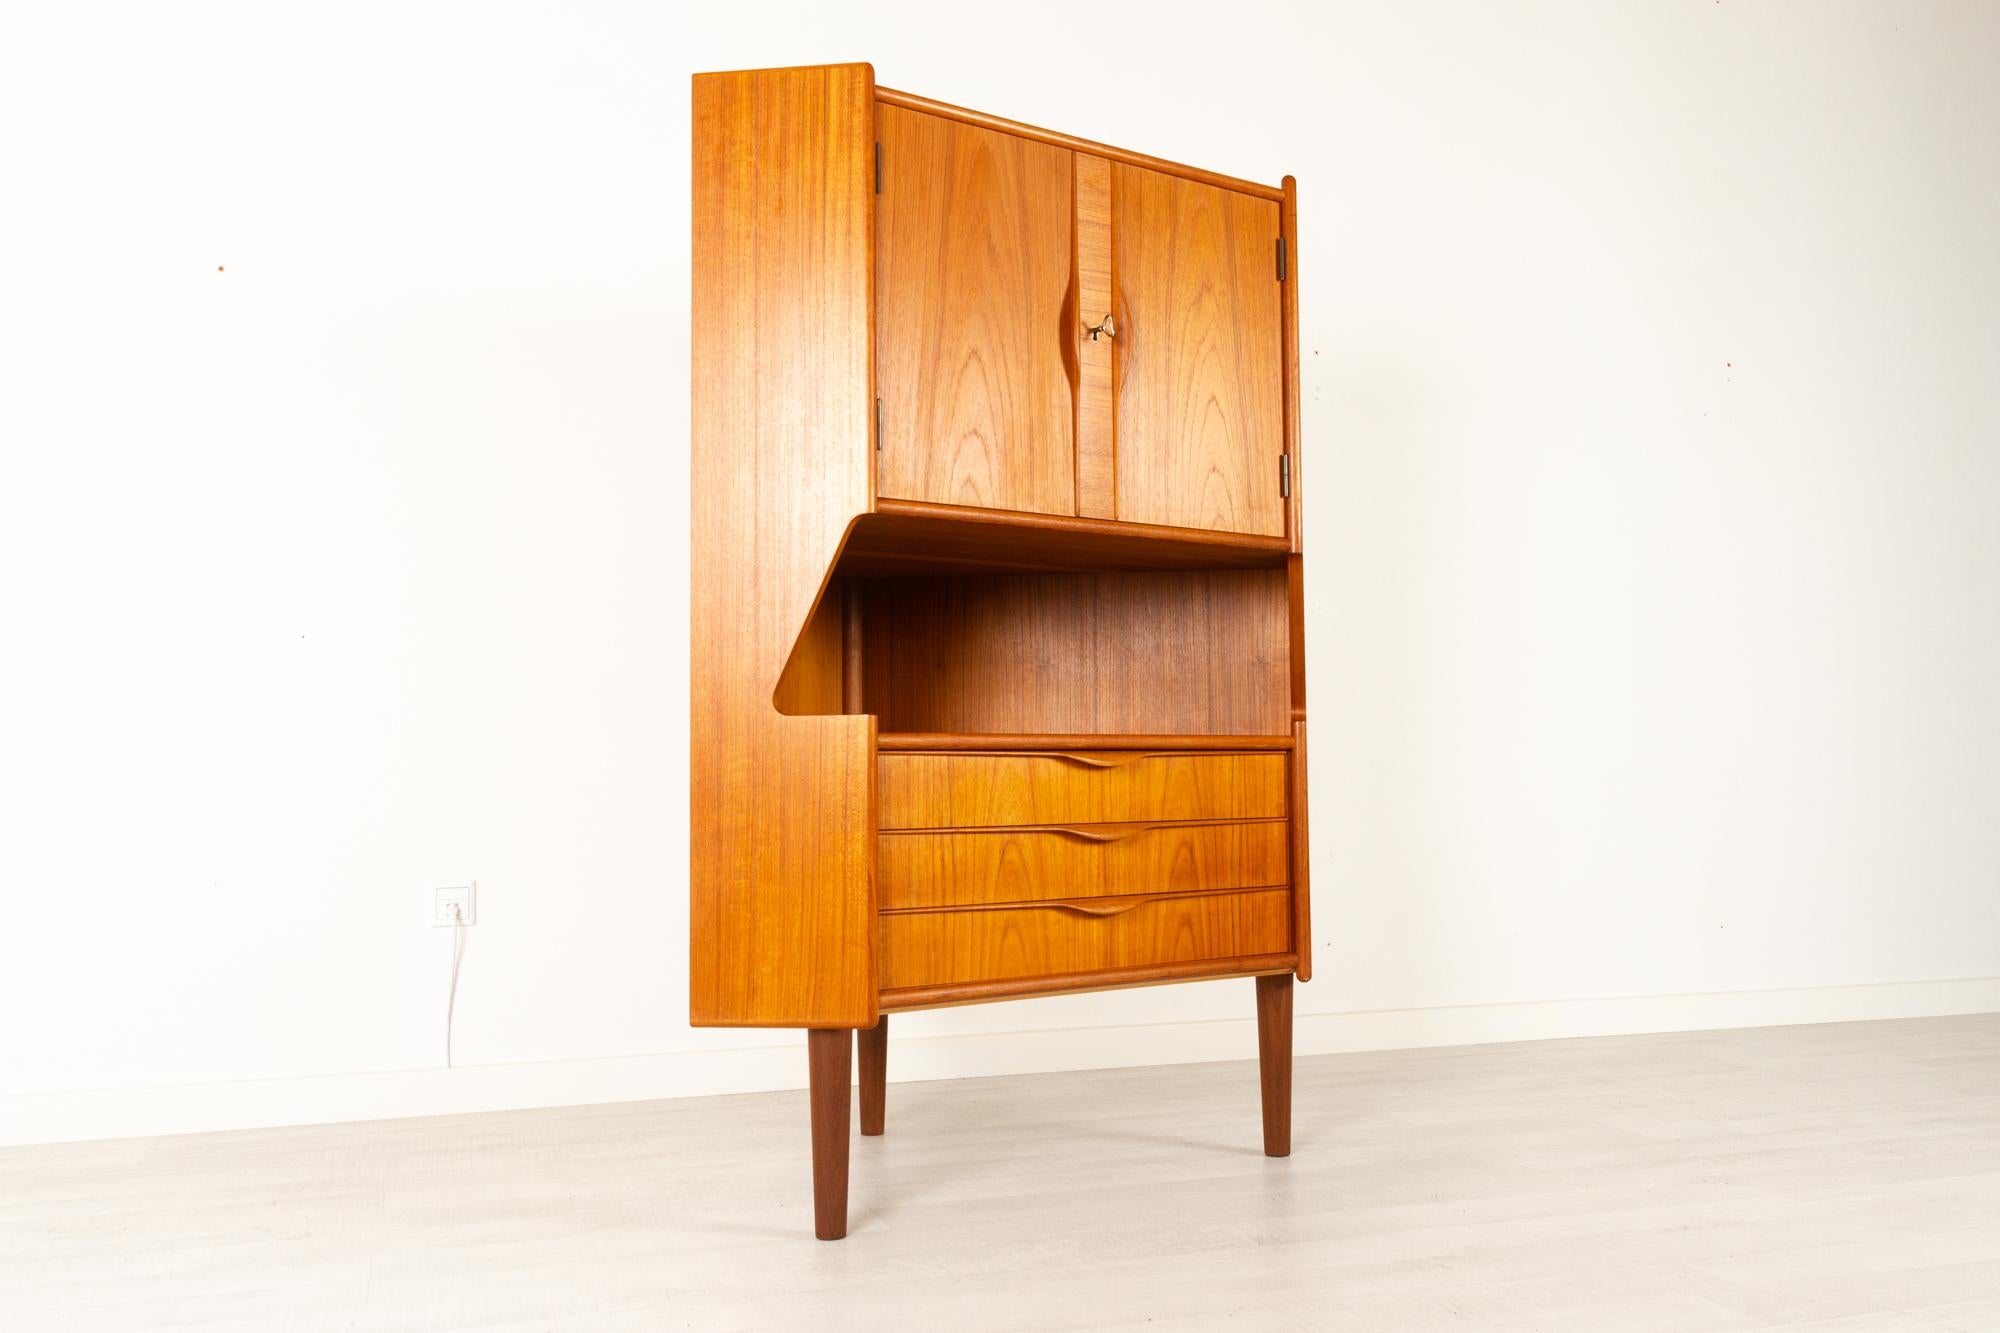 Danish Mid-Century Modern teak corner cabinet with bar unit, 1960s.
Very elegant cabinet with large mirrored dry bar, three wide drawers with dovetail joints and an open shelf. Sculpted grips in solid teak. Double cabinet doors with lock and key.